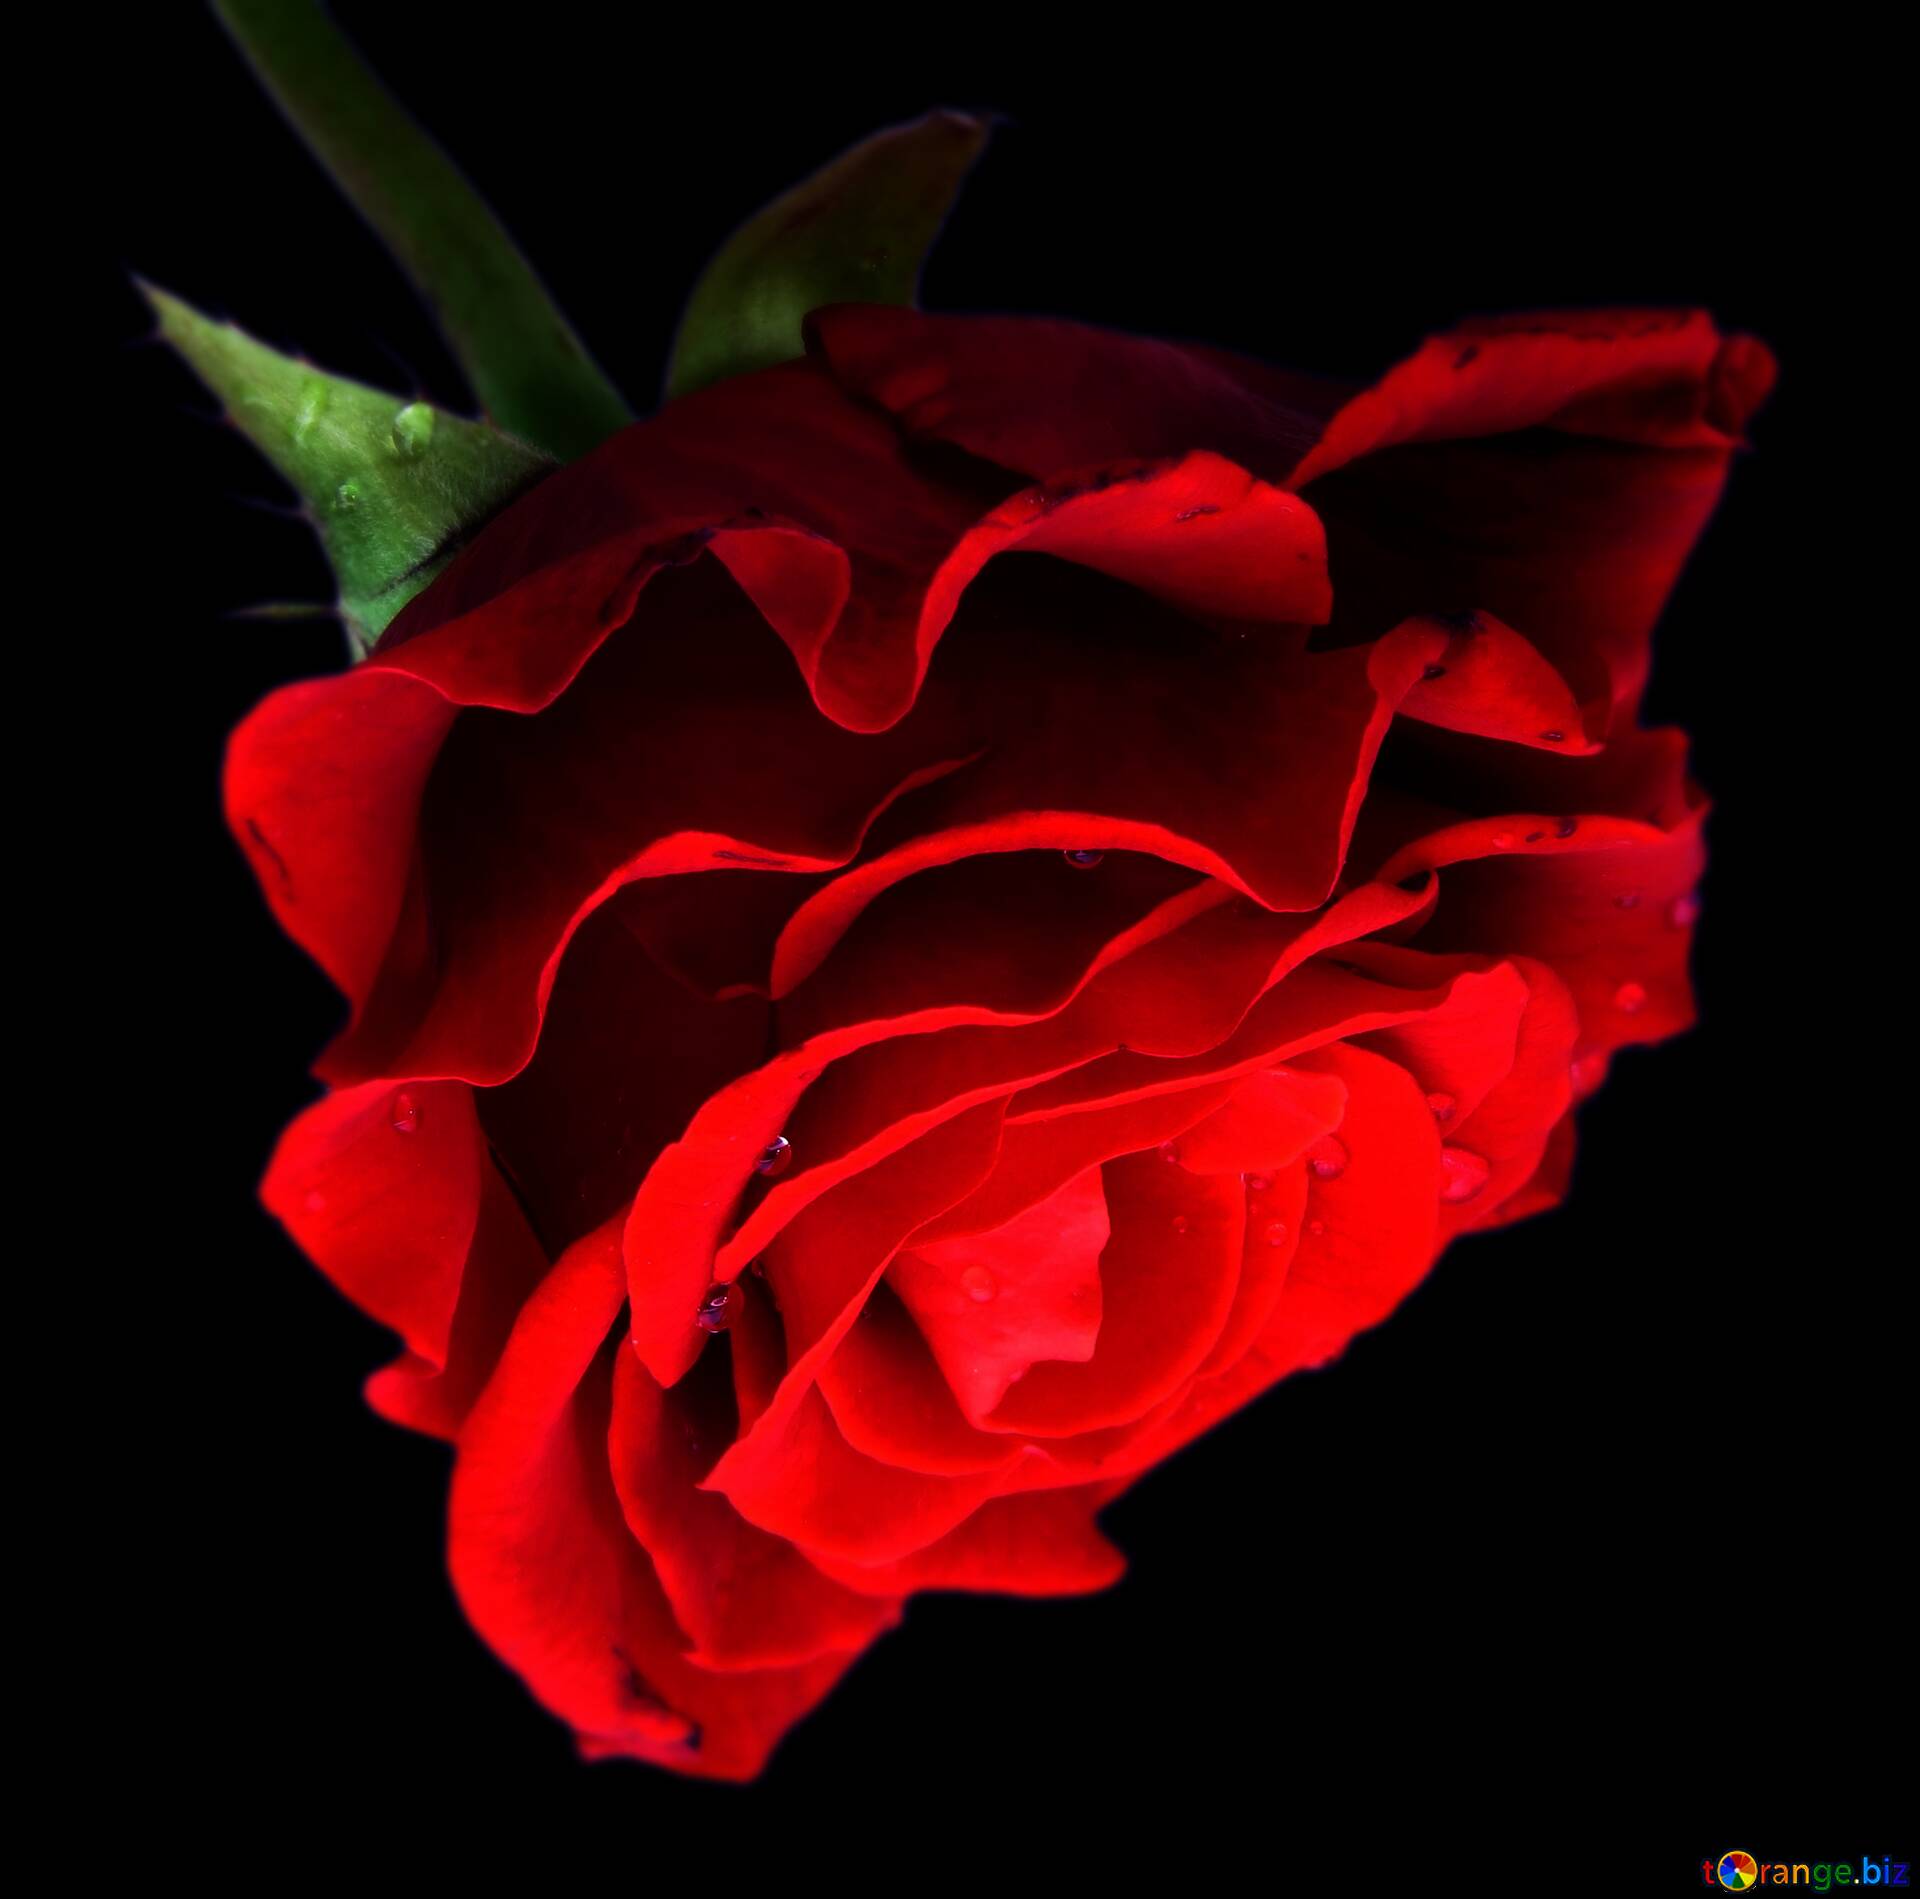 Download free picture Red rose on black background on CC-BY License ~ Free  Image Stock  ~ fx №216542